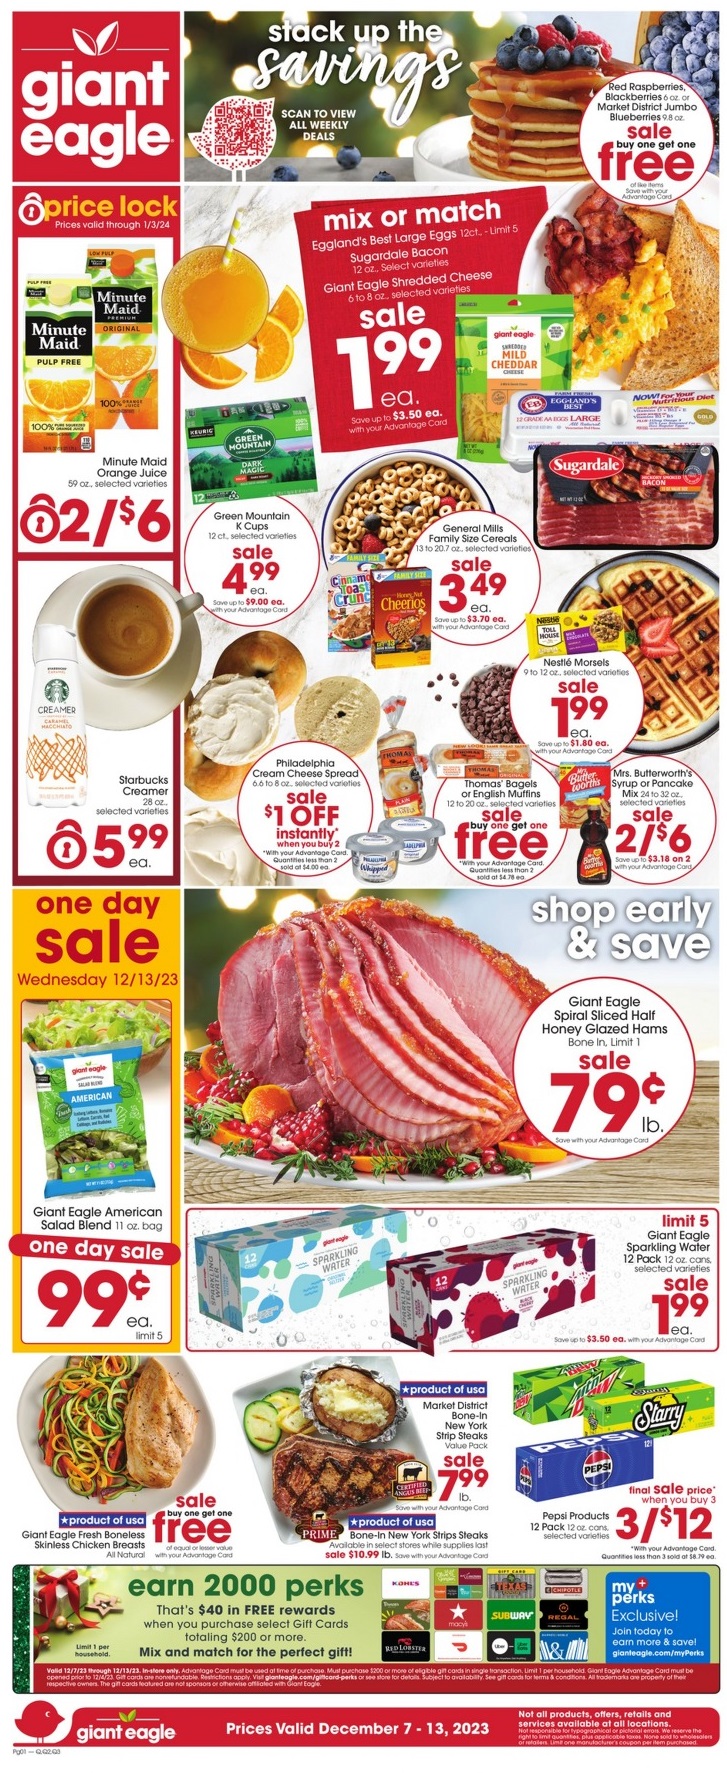 Giant Eagle Weekly Ad December 7 to December 13, 2023 1 – giant eagle ad 1